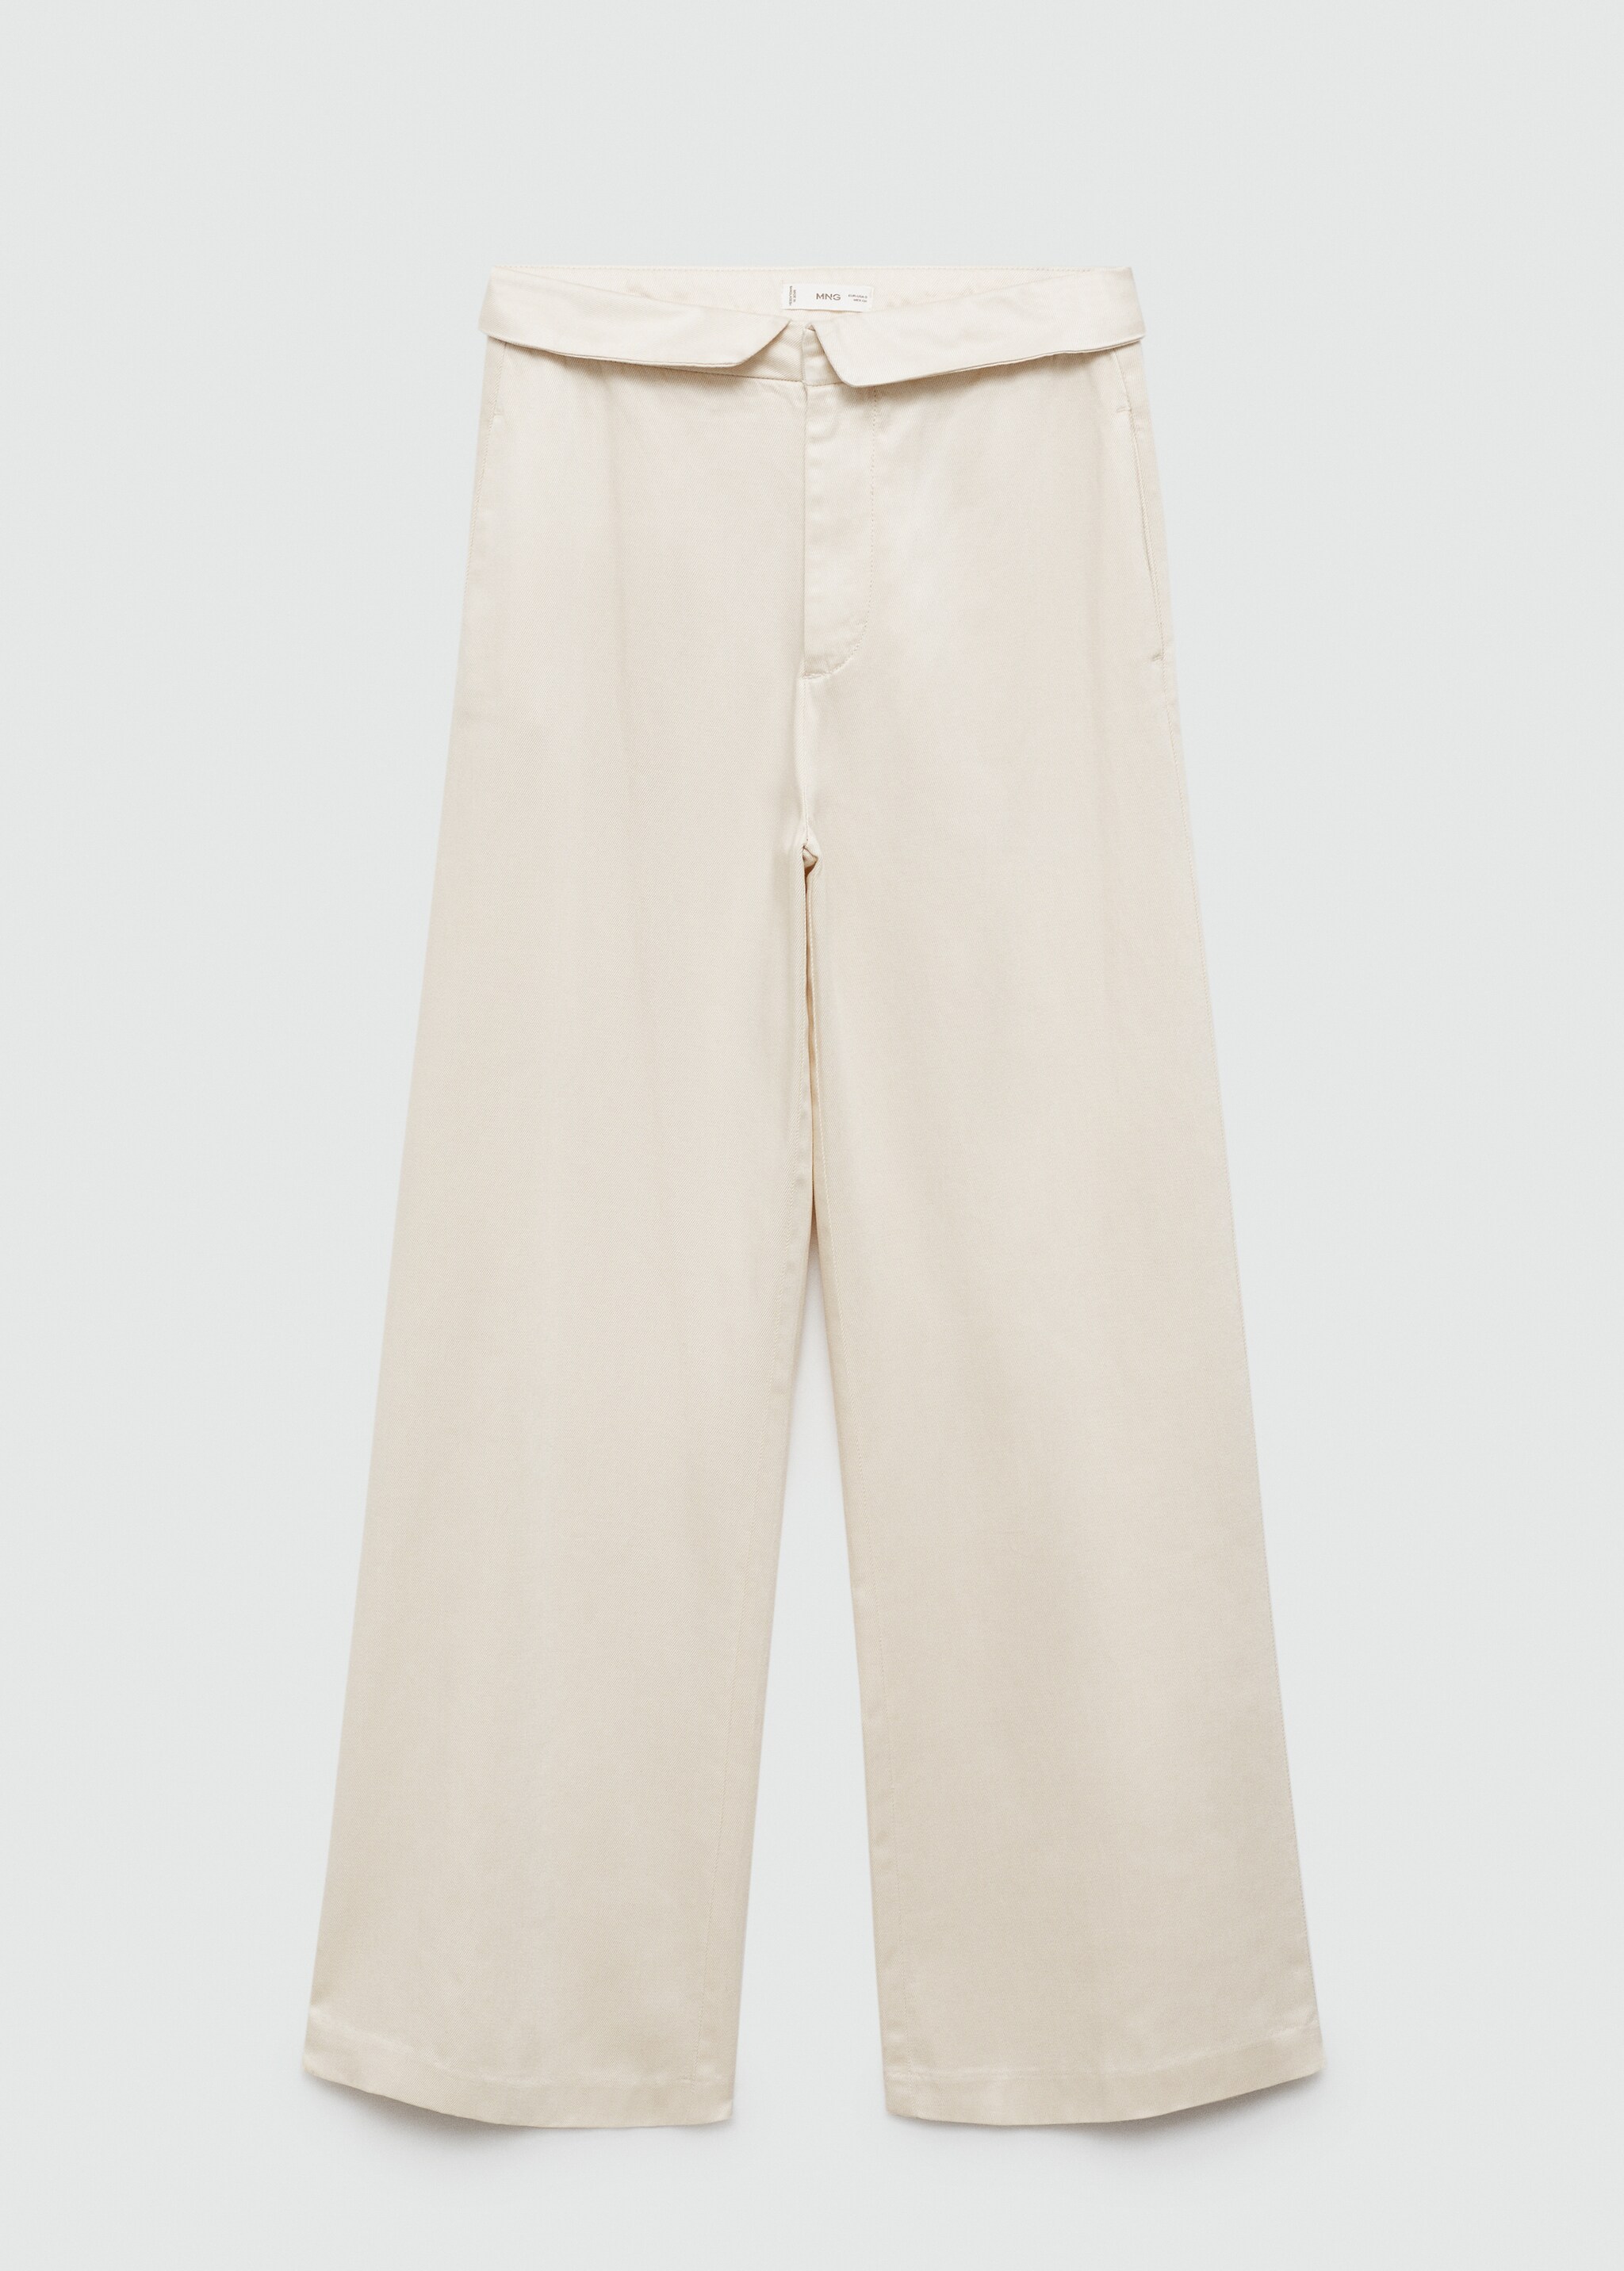 Turn-up waist trousers - Article without model